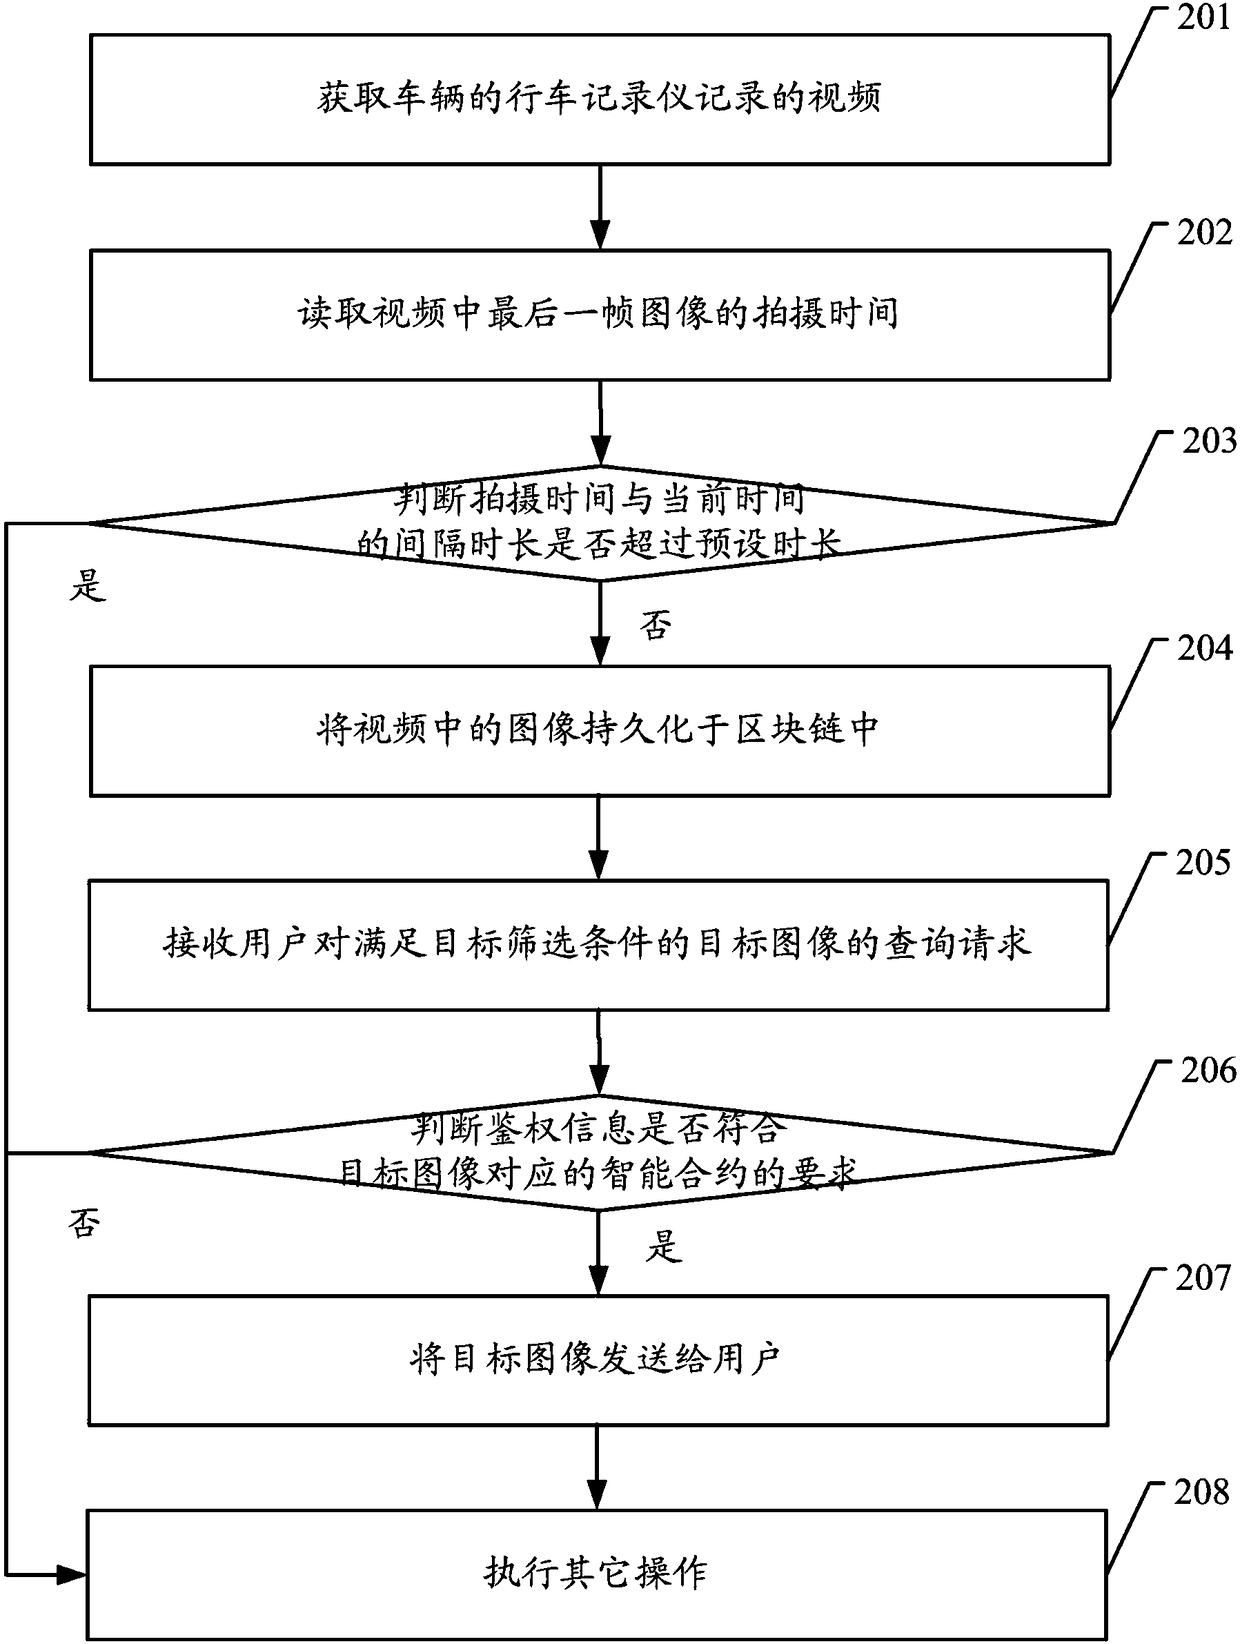 Driving record information processing method and device based on blockchain